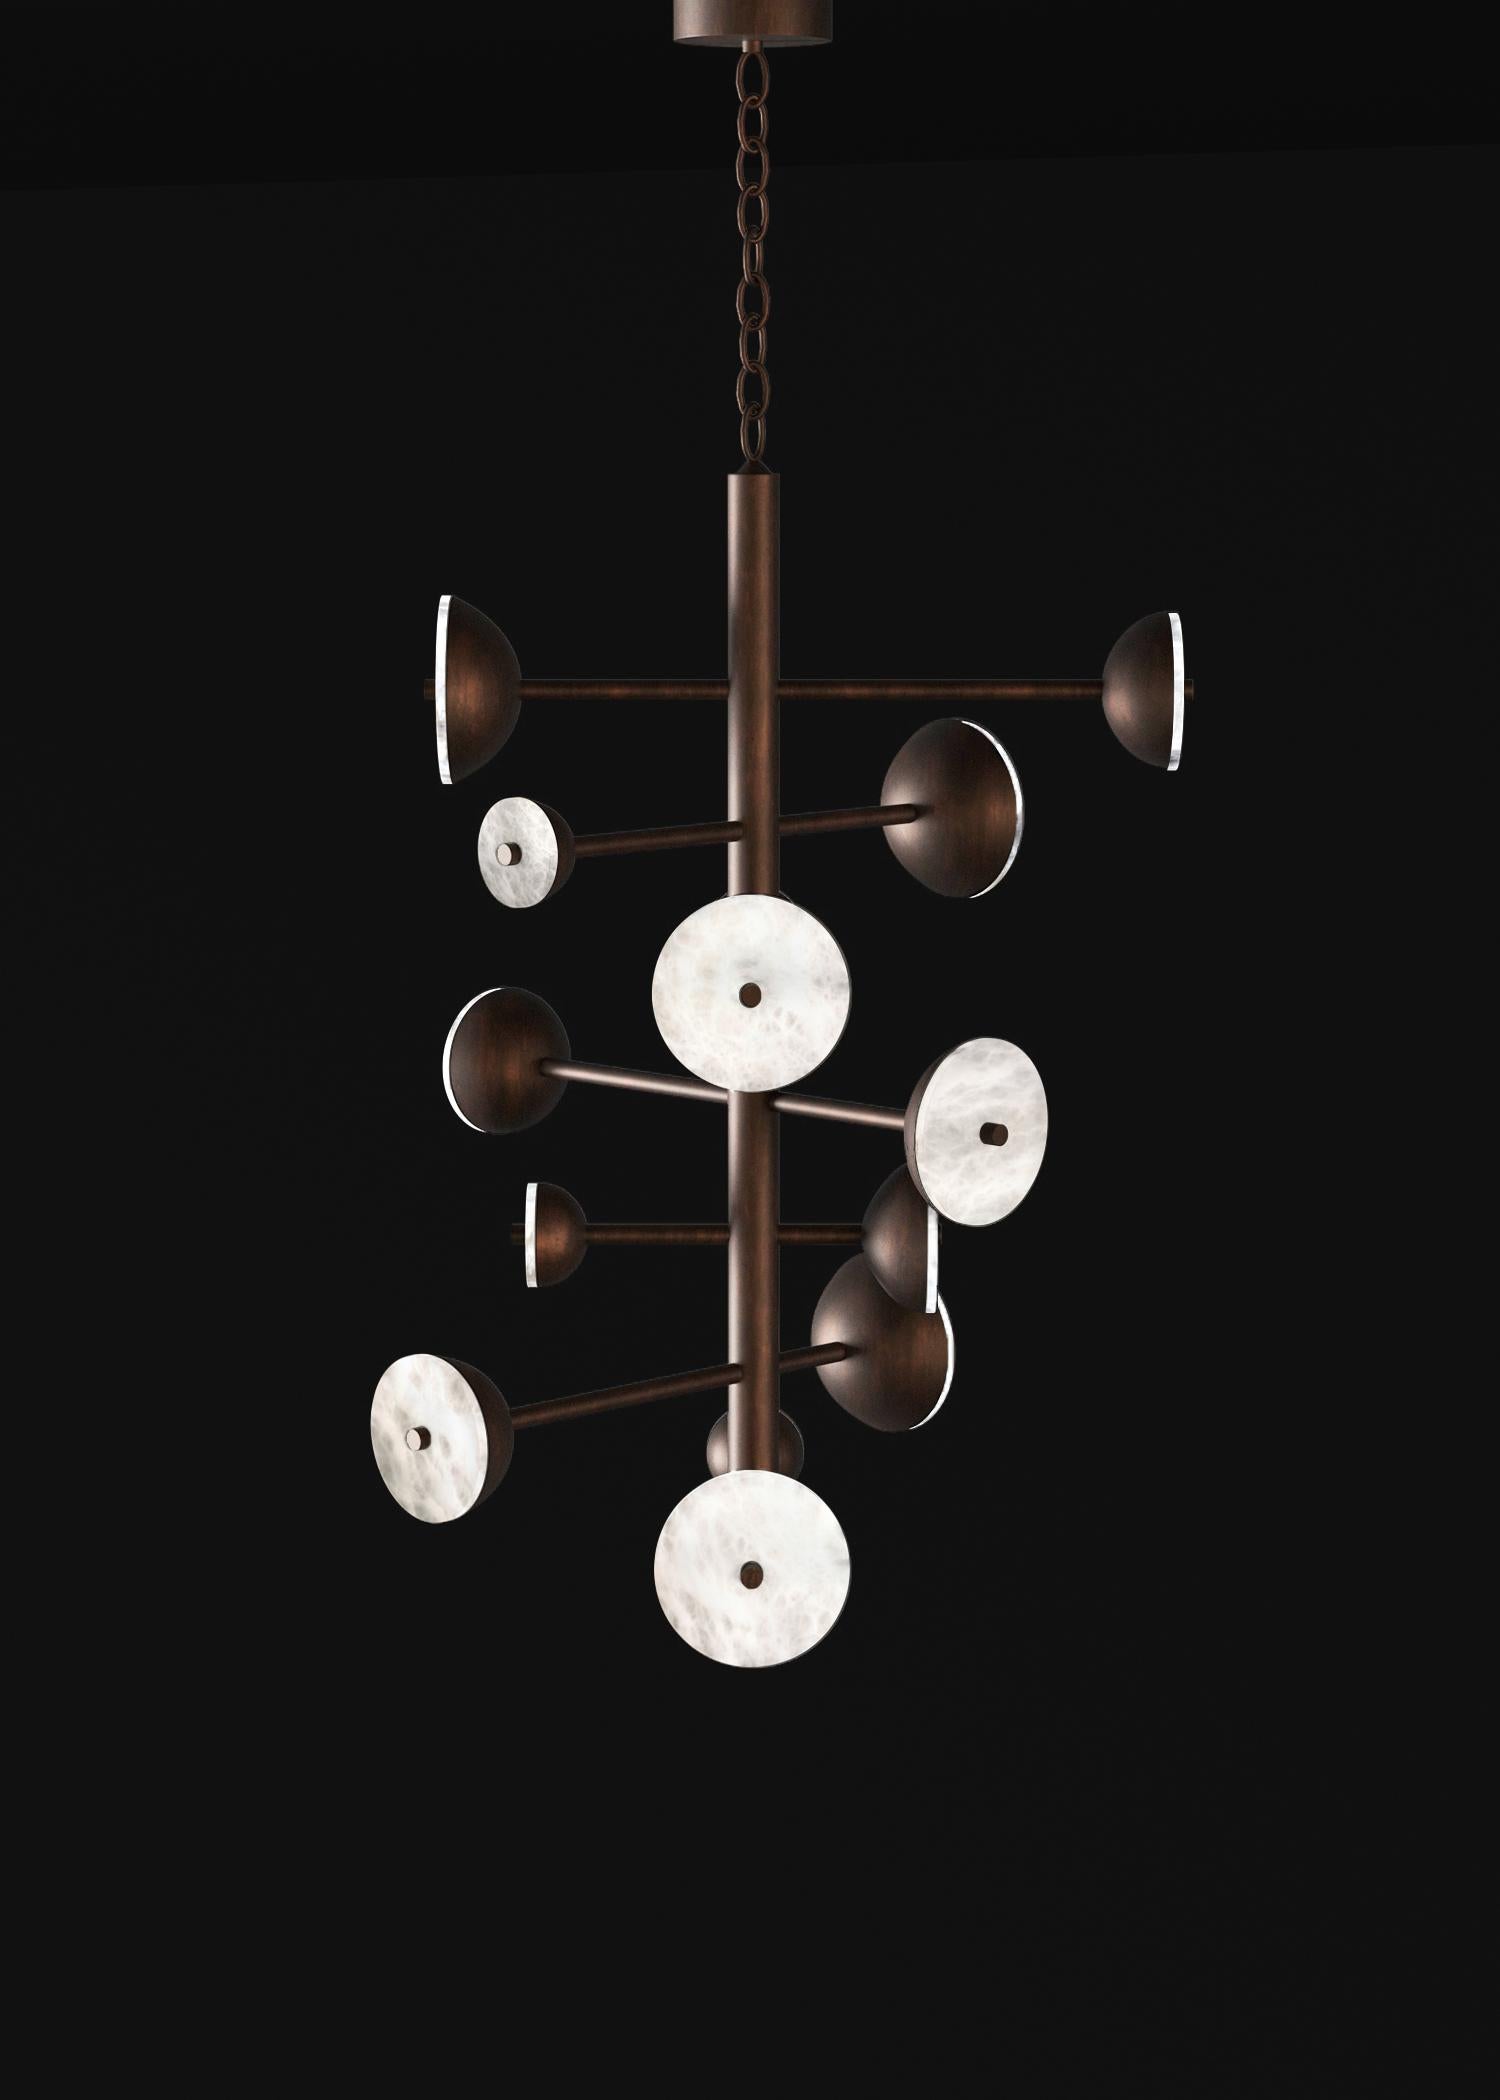 Teti Ruggine Of Florence Metal Chandelier by Alabastro Italiano
Dimensions: D 74,5 x W 77,5 x H 110 cm.
Materials: White alabaster and metal.

Available in different finishes: Shiny Silver, Bronze, Brushed Brass, Ruggine of Florence, Brushed